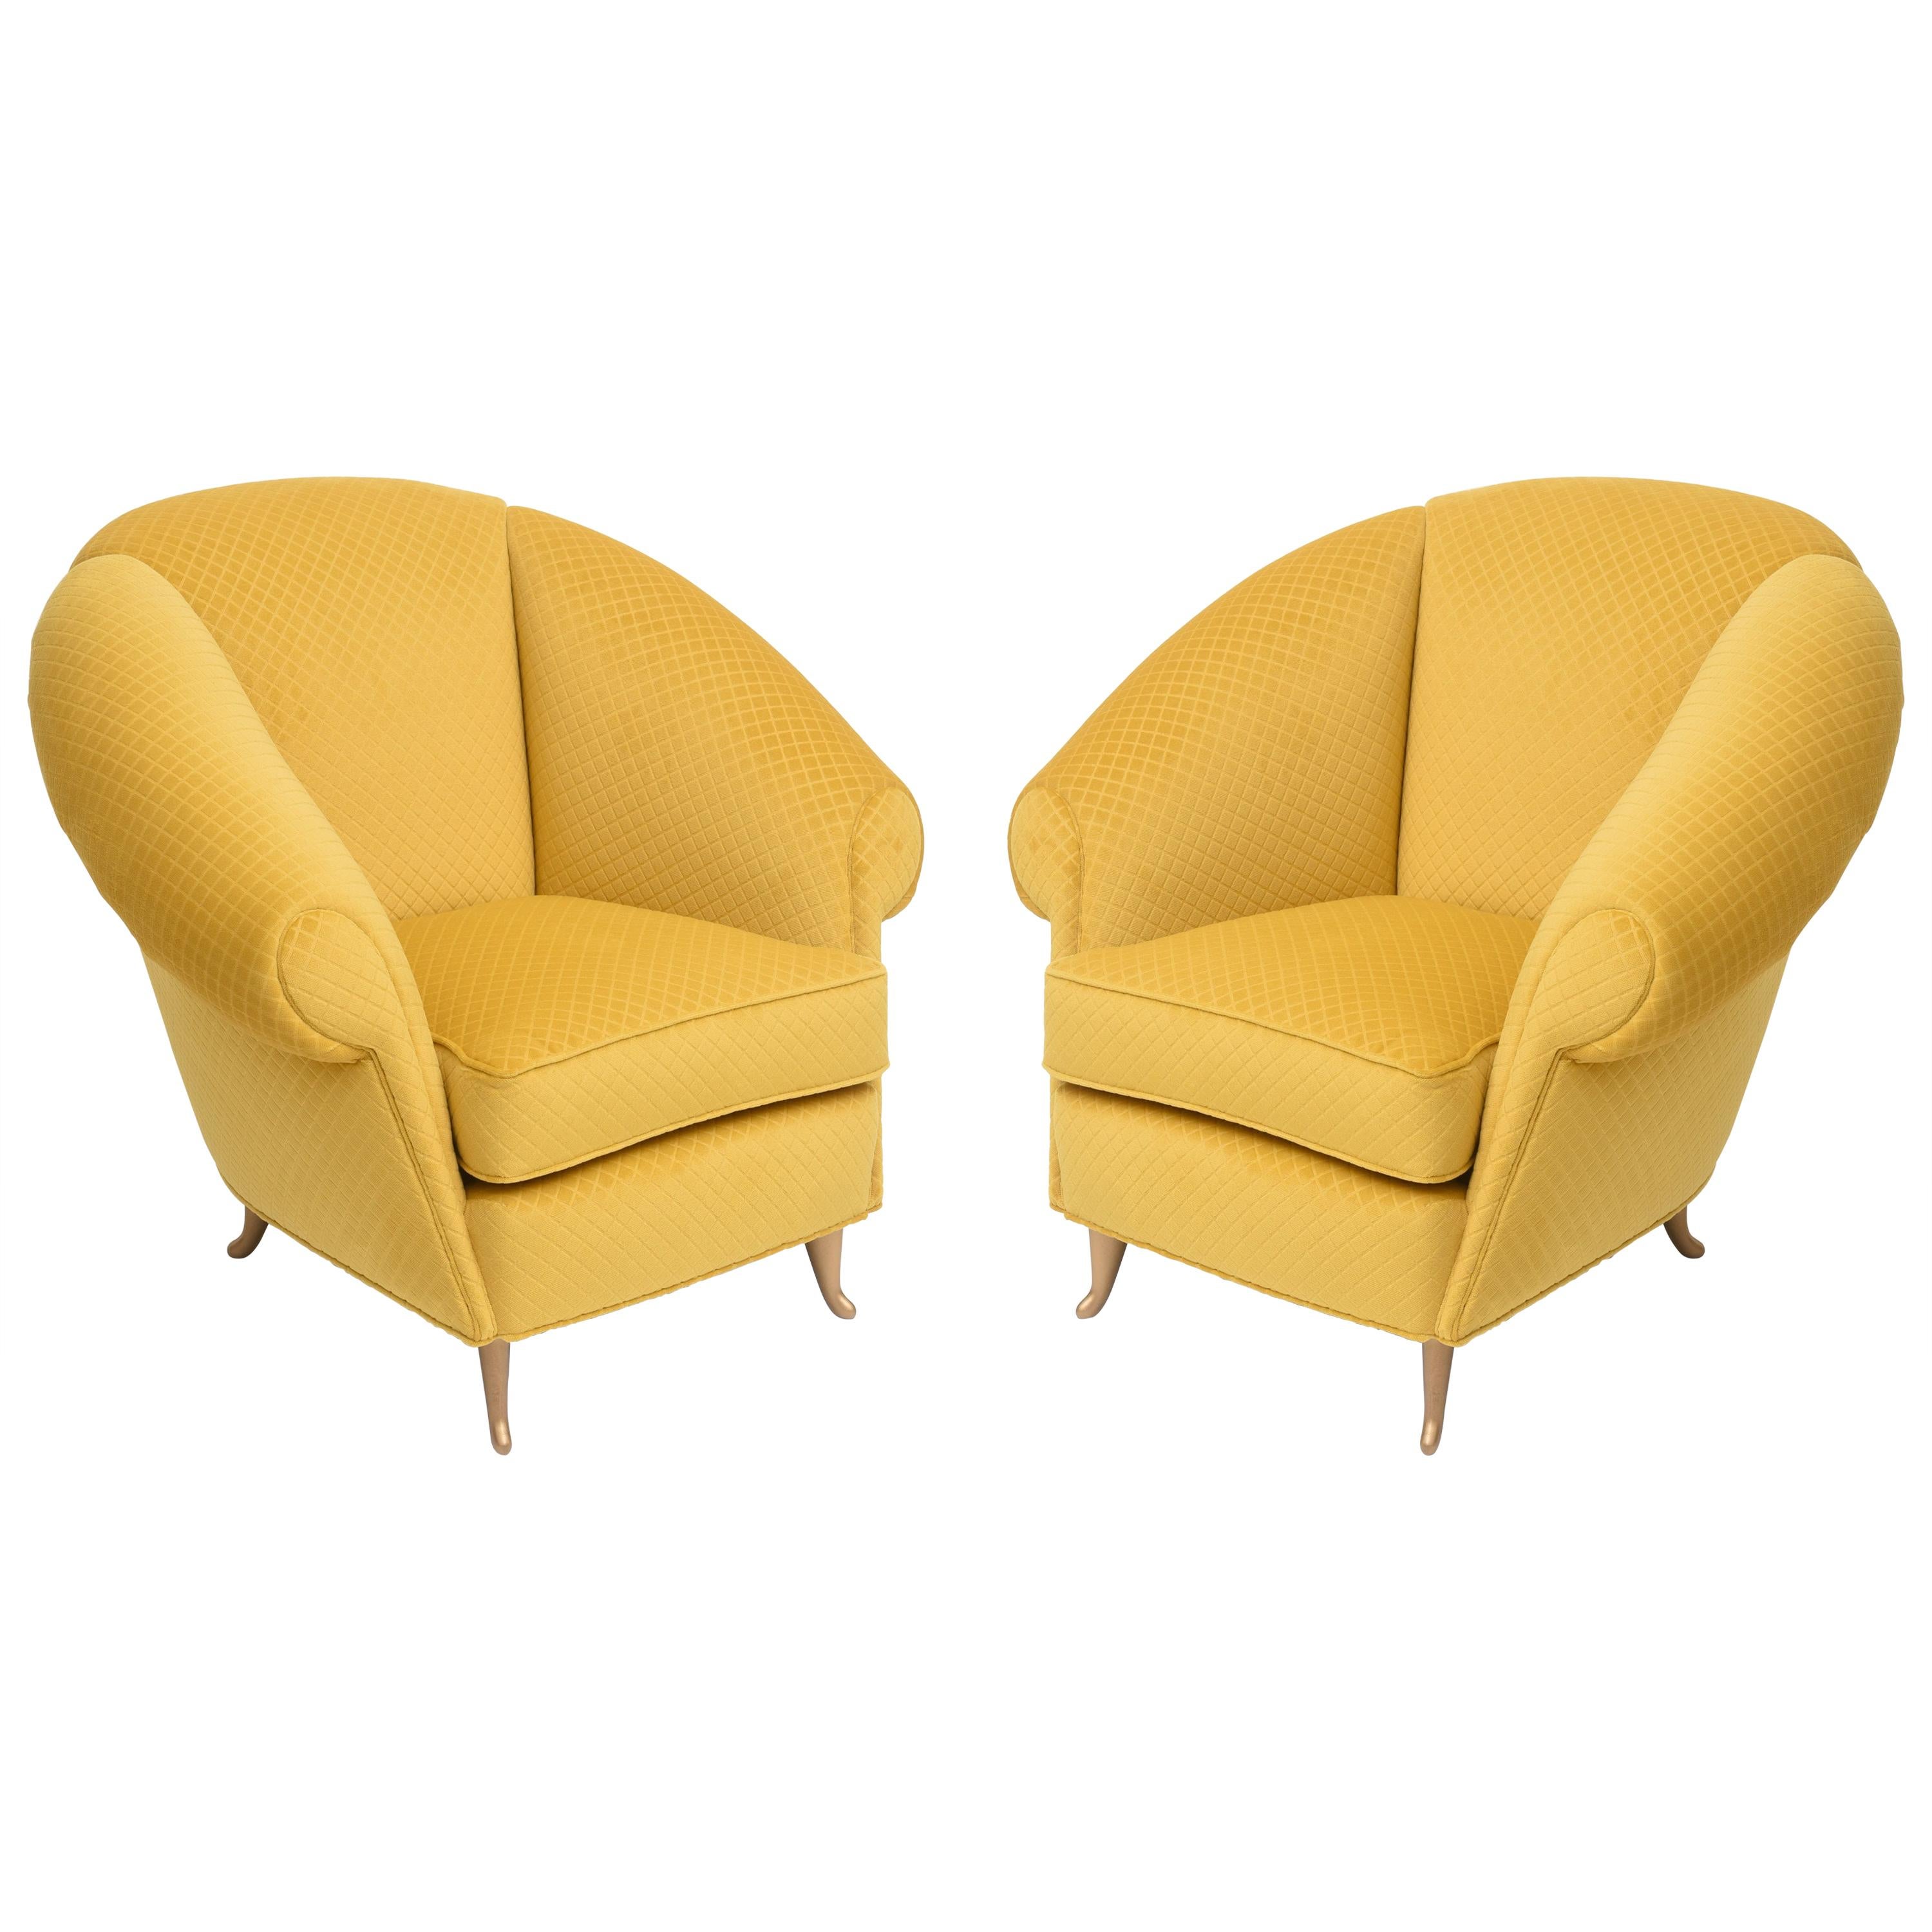 Pair of Italian Modern Lounge Chairs, Gio Ponti for ISA, Model 12690, 1950' For Sale